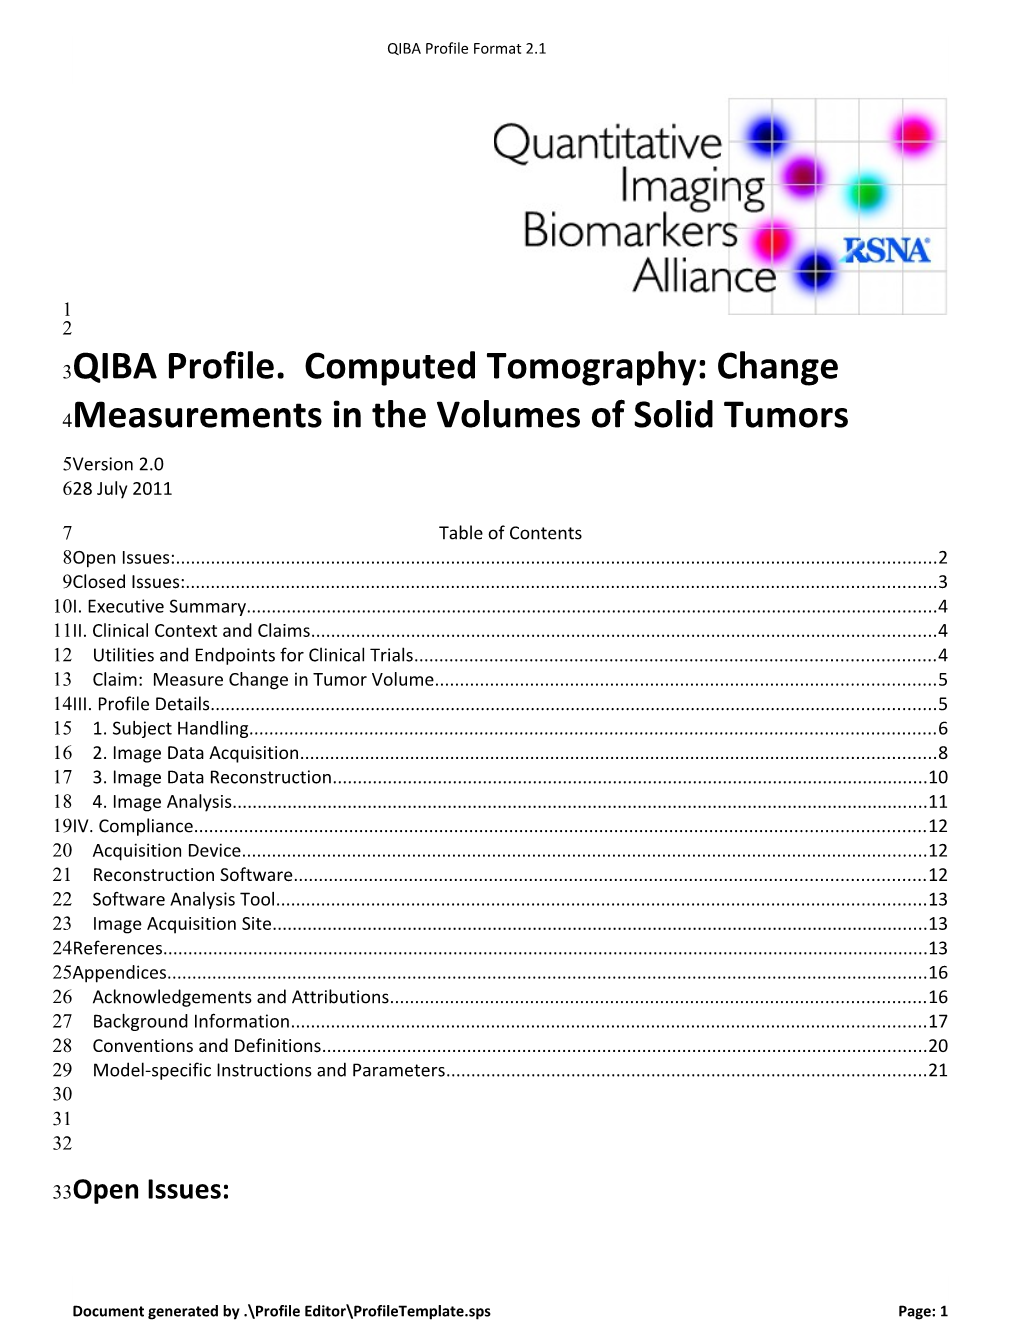 QIBA Profile. Computed Tomography: Change Measurements in the Volumes of Solid Tumors